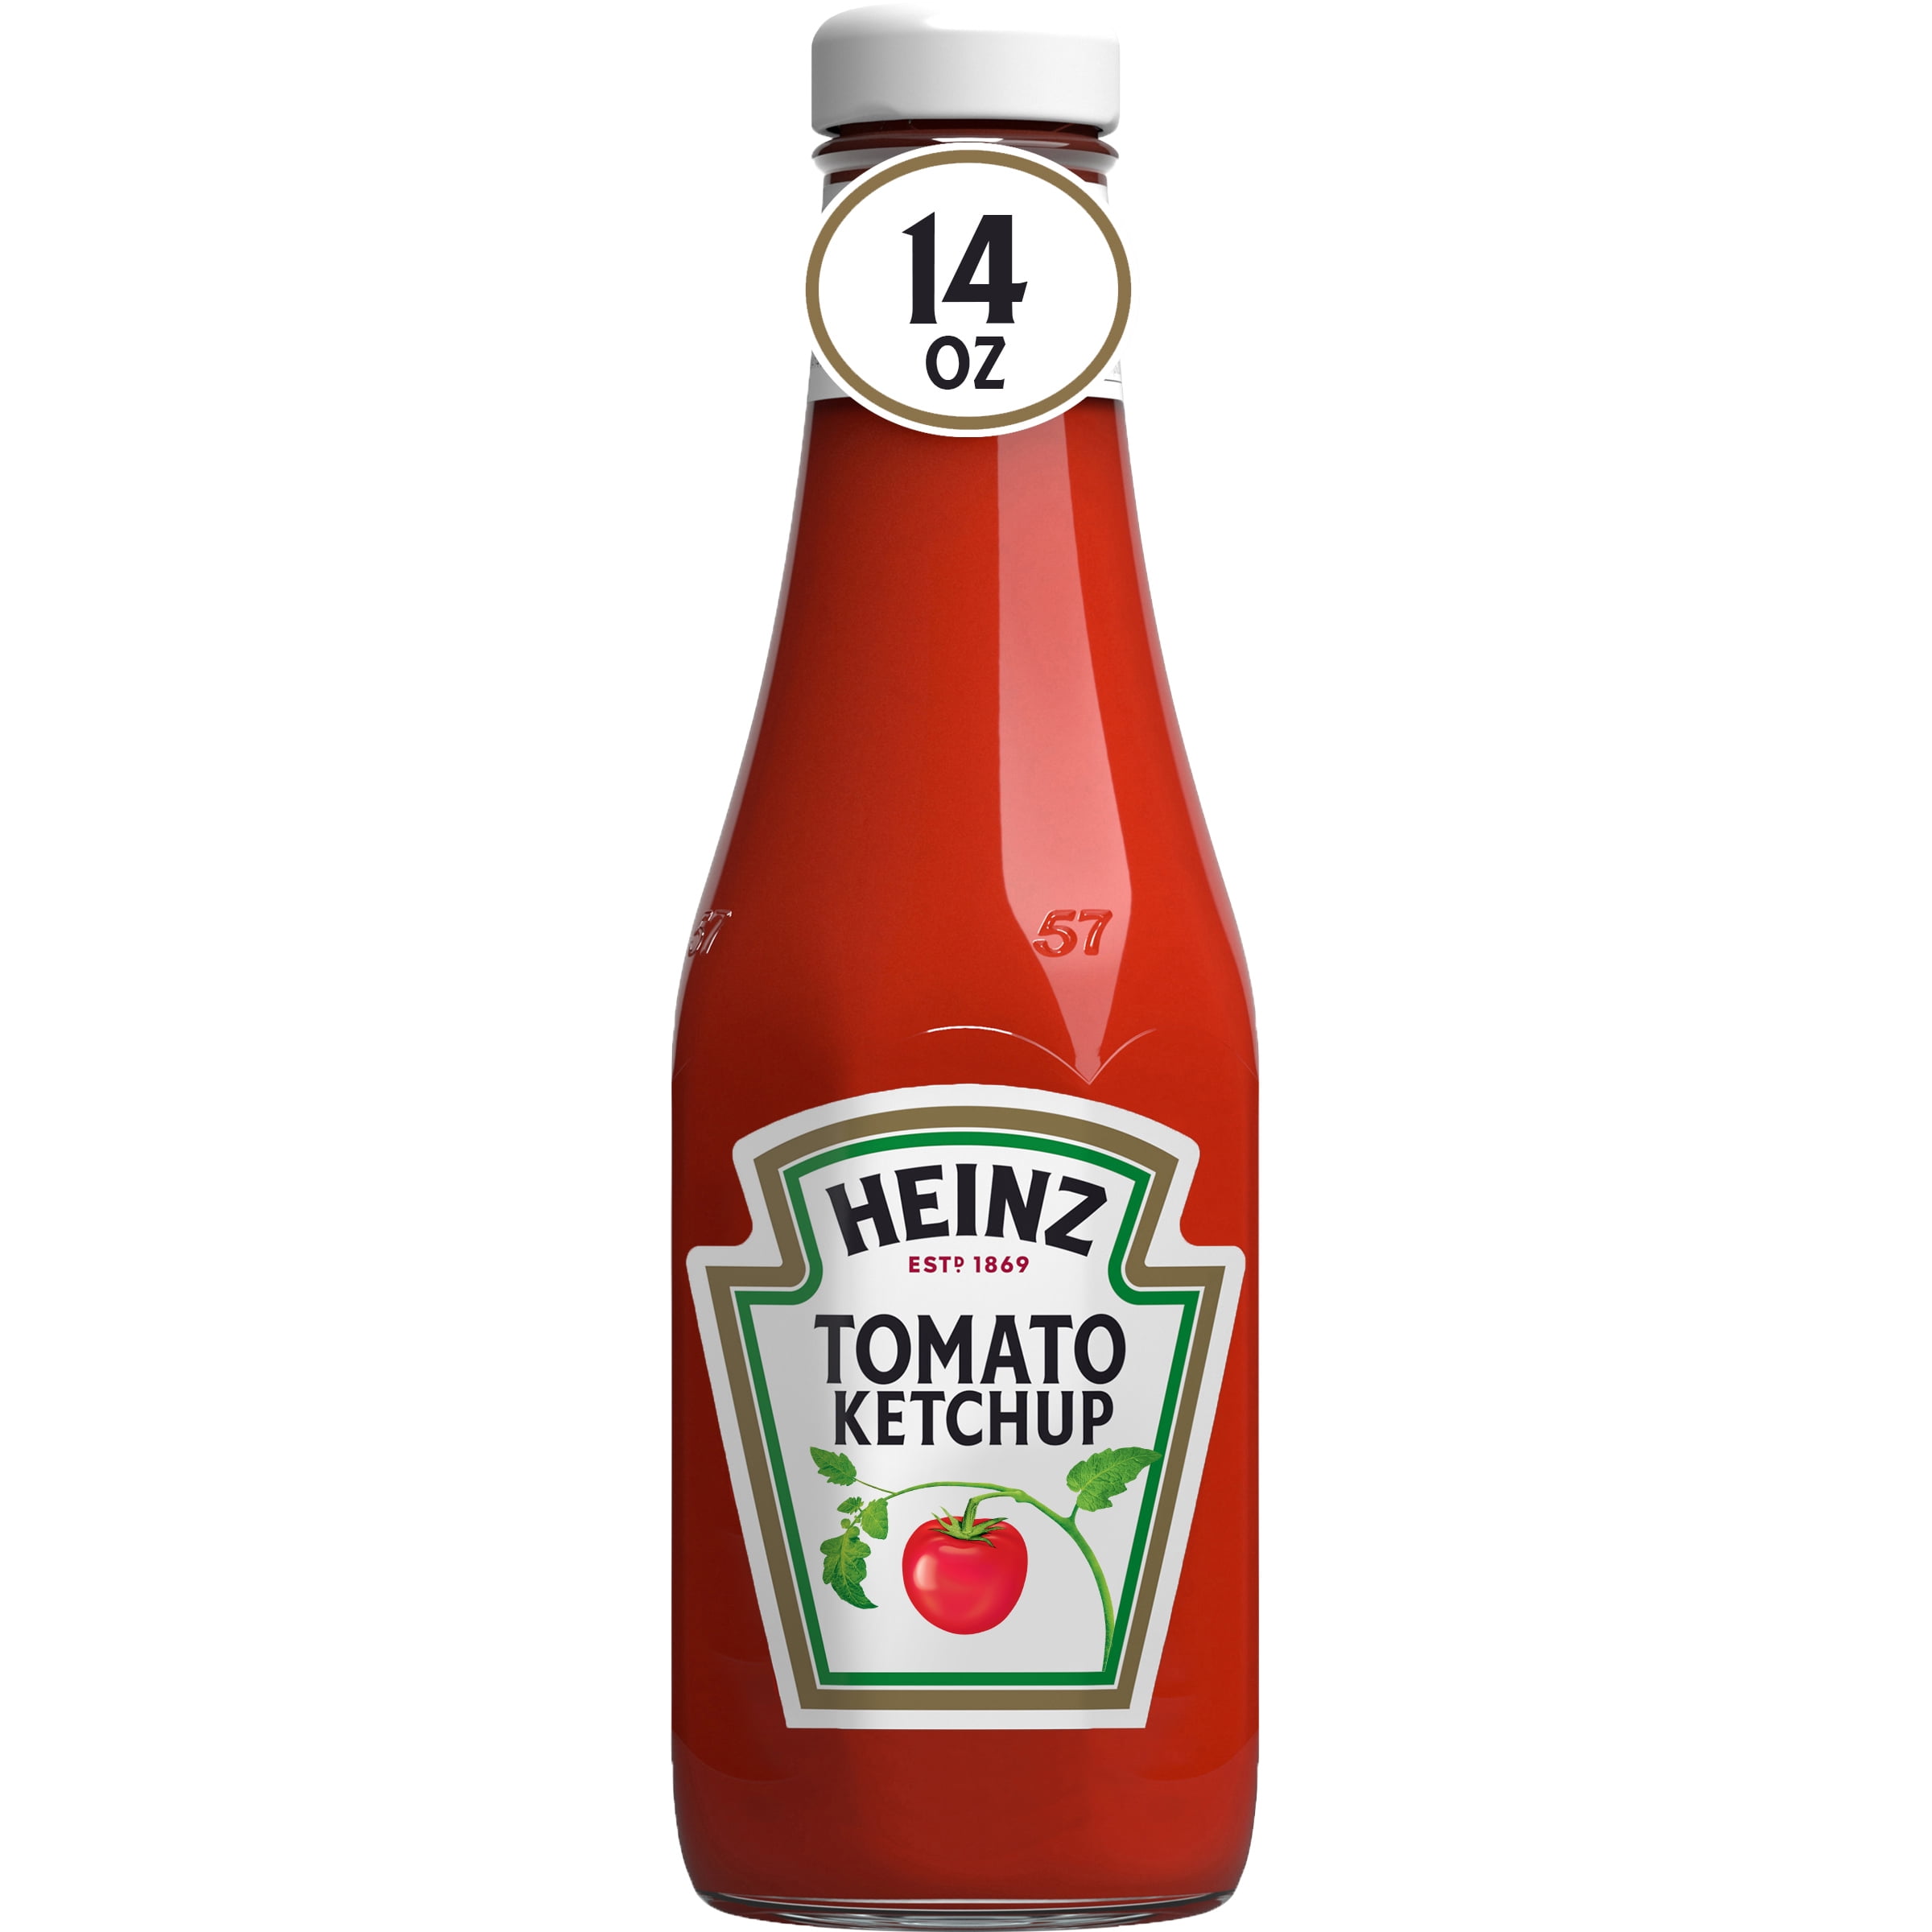 Heinz Classic Glass Ketchup Bottles, 14 Ounce (Pack of 3)